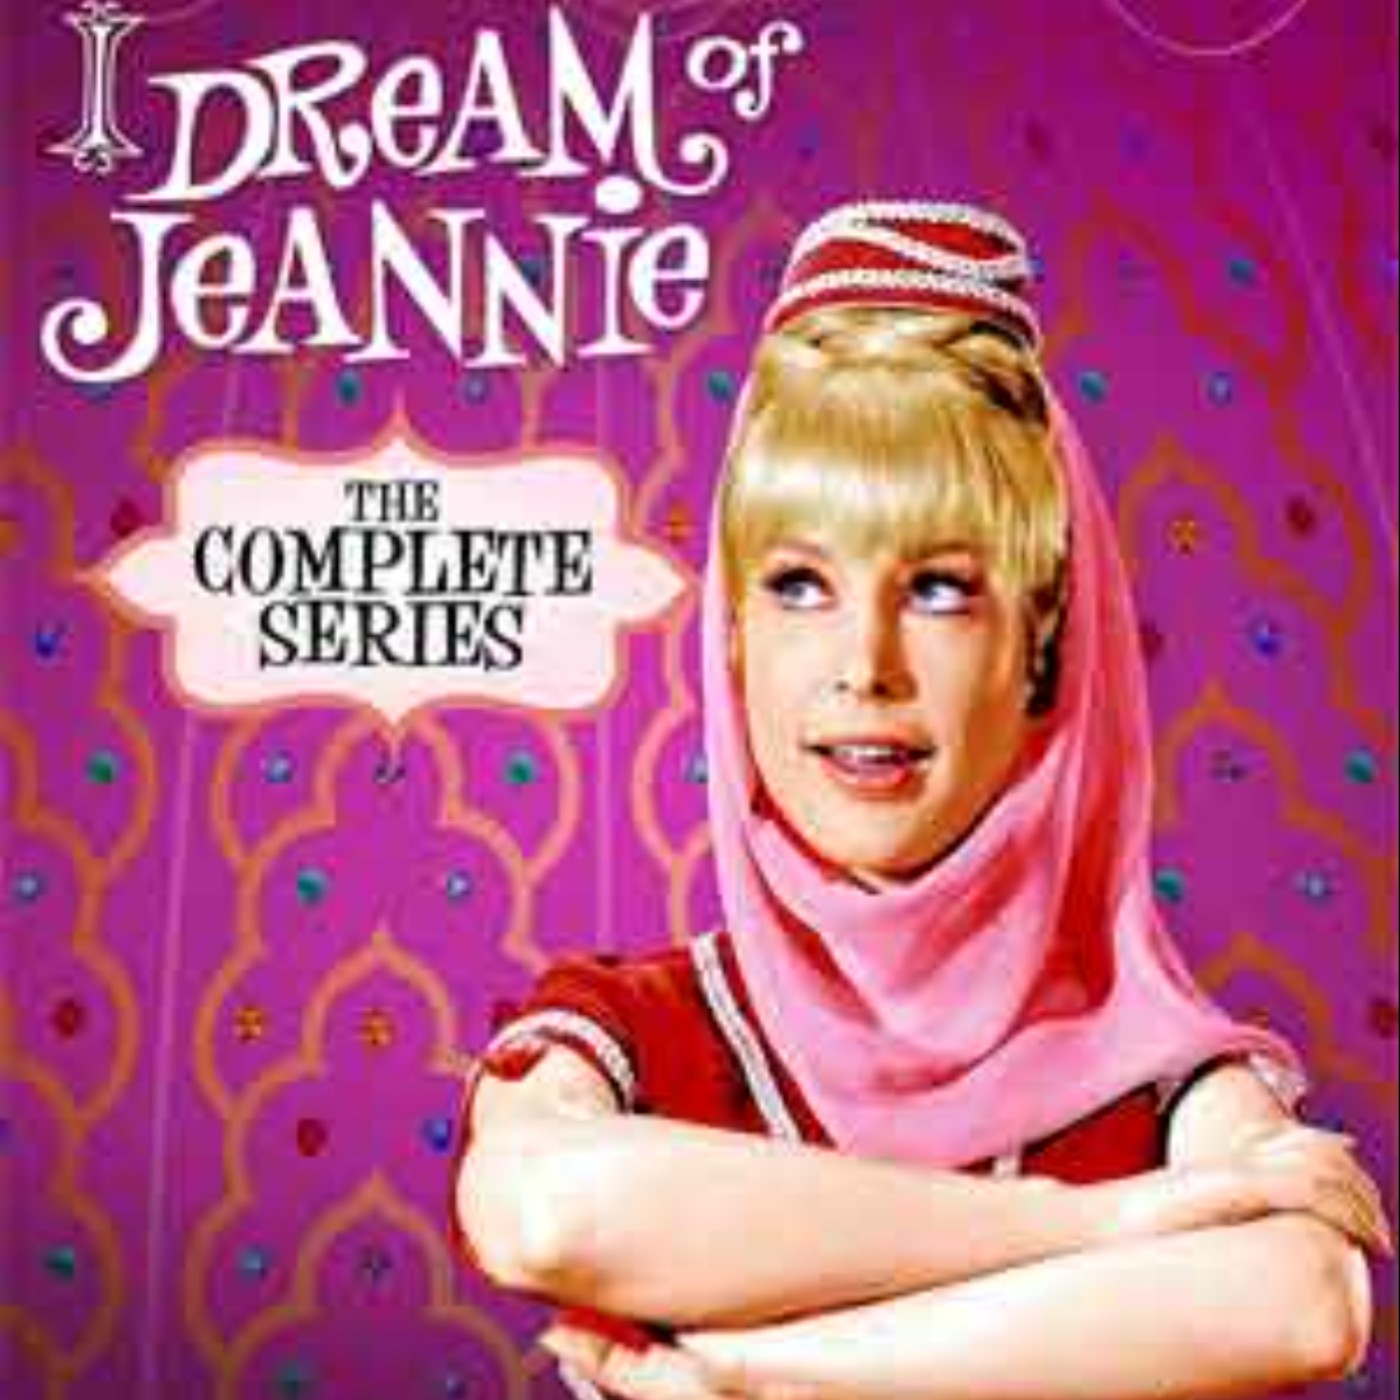 I dream of jeannie hindi dubbed episodes